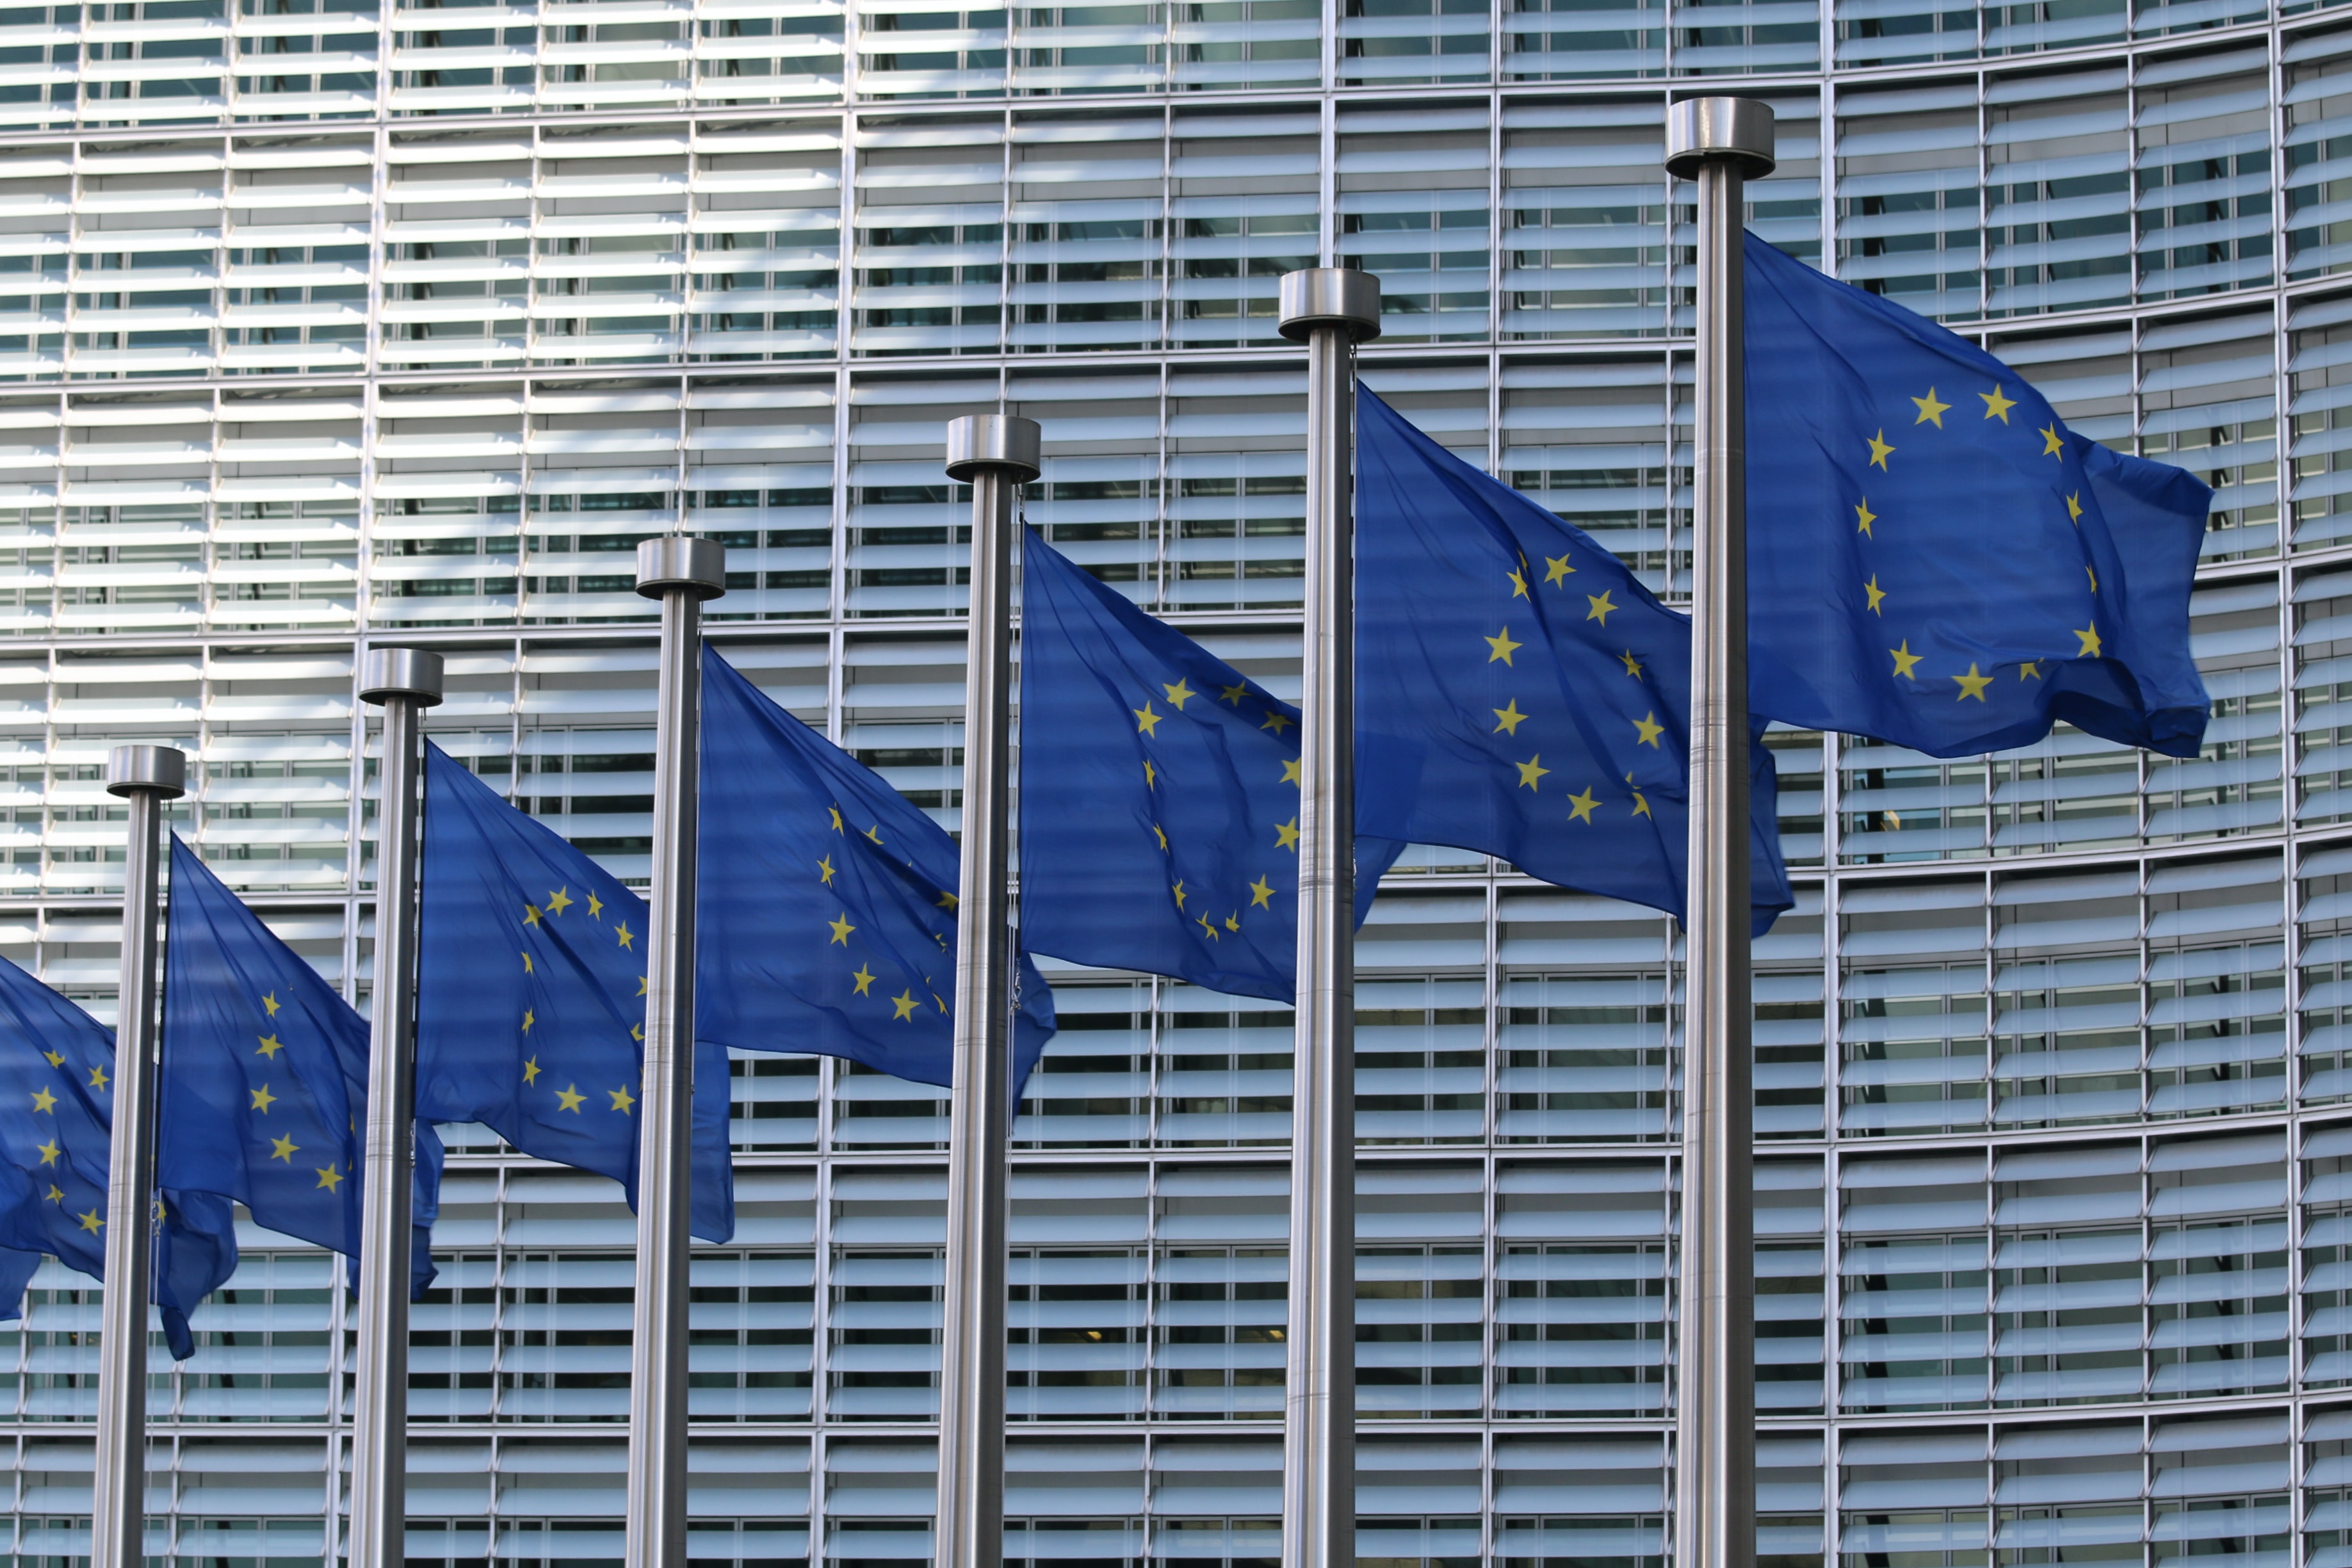 European flags with a building in the background.